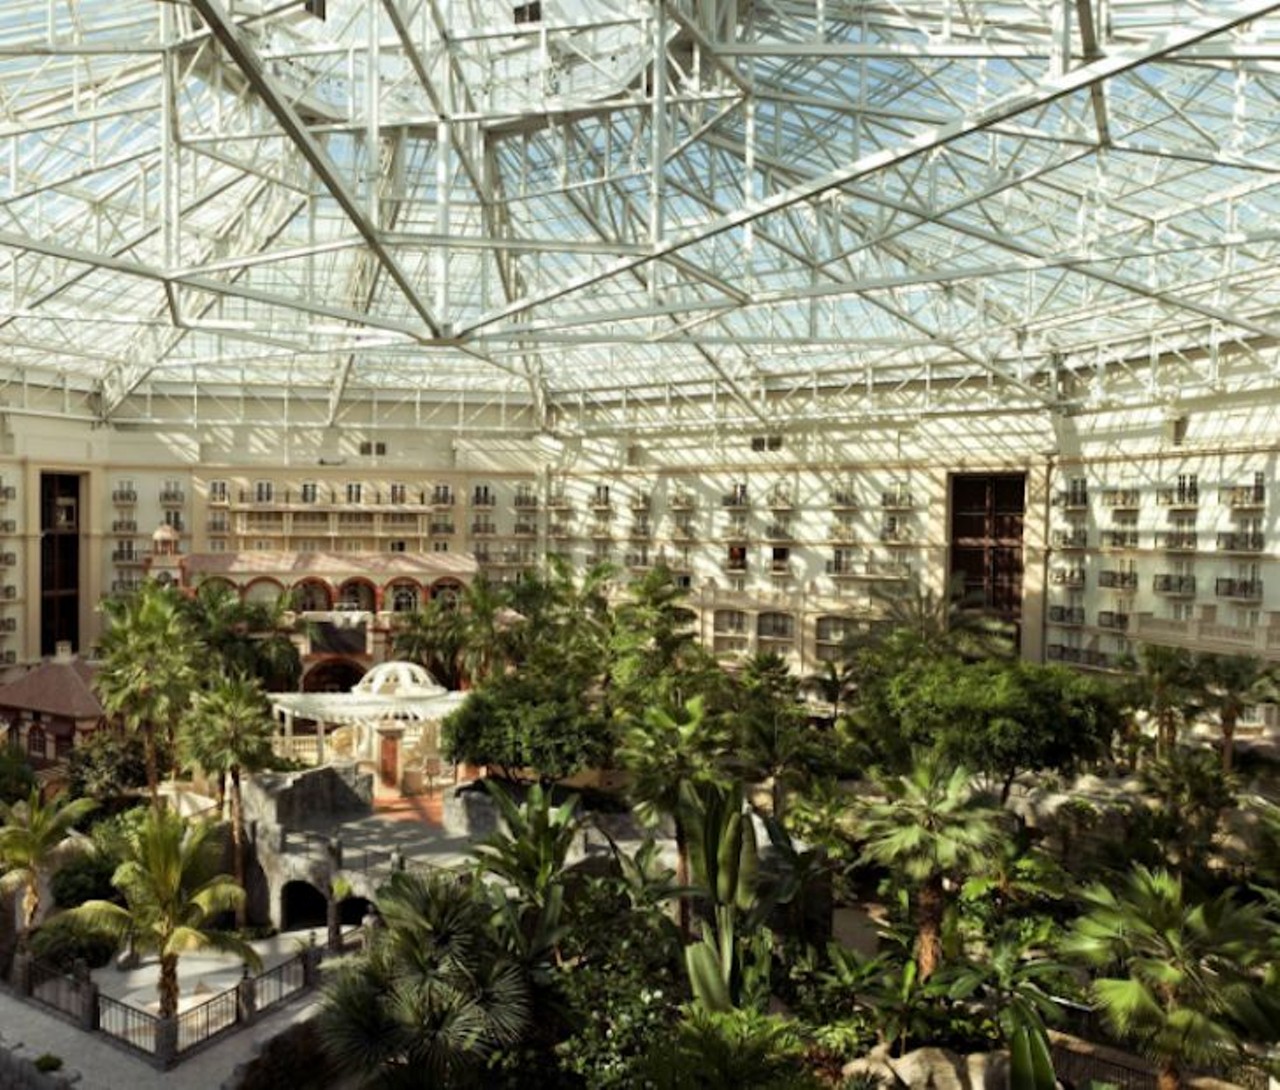 Relax at the Gaylord Palms atrium garden 
6000 W. Osceola Parkway, Kissimmee, 407-586-0000, www.marriott.com 
Enjoy the best of Florida greenery and wildlife while staying inside the atrium's glass confines. You can check out the gator exhibit or relax at the award-winning day spa. 
Photo via Gaylord Palms Resort & Convention Center/Facebook